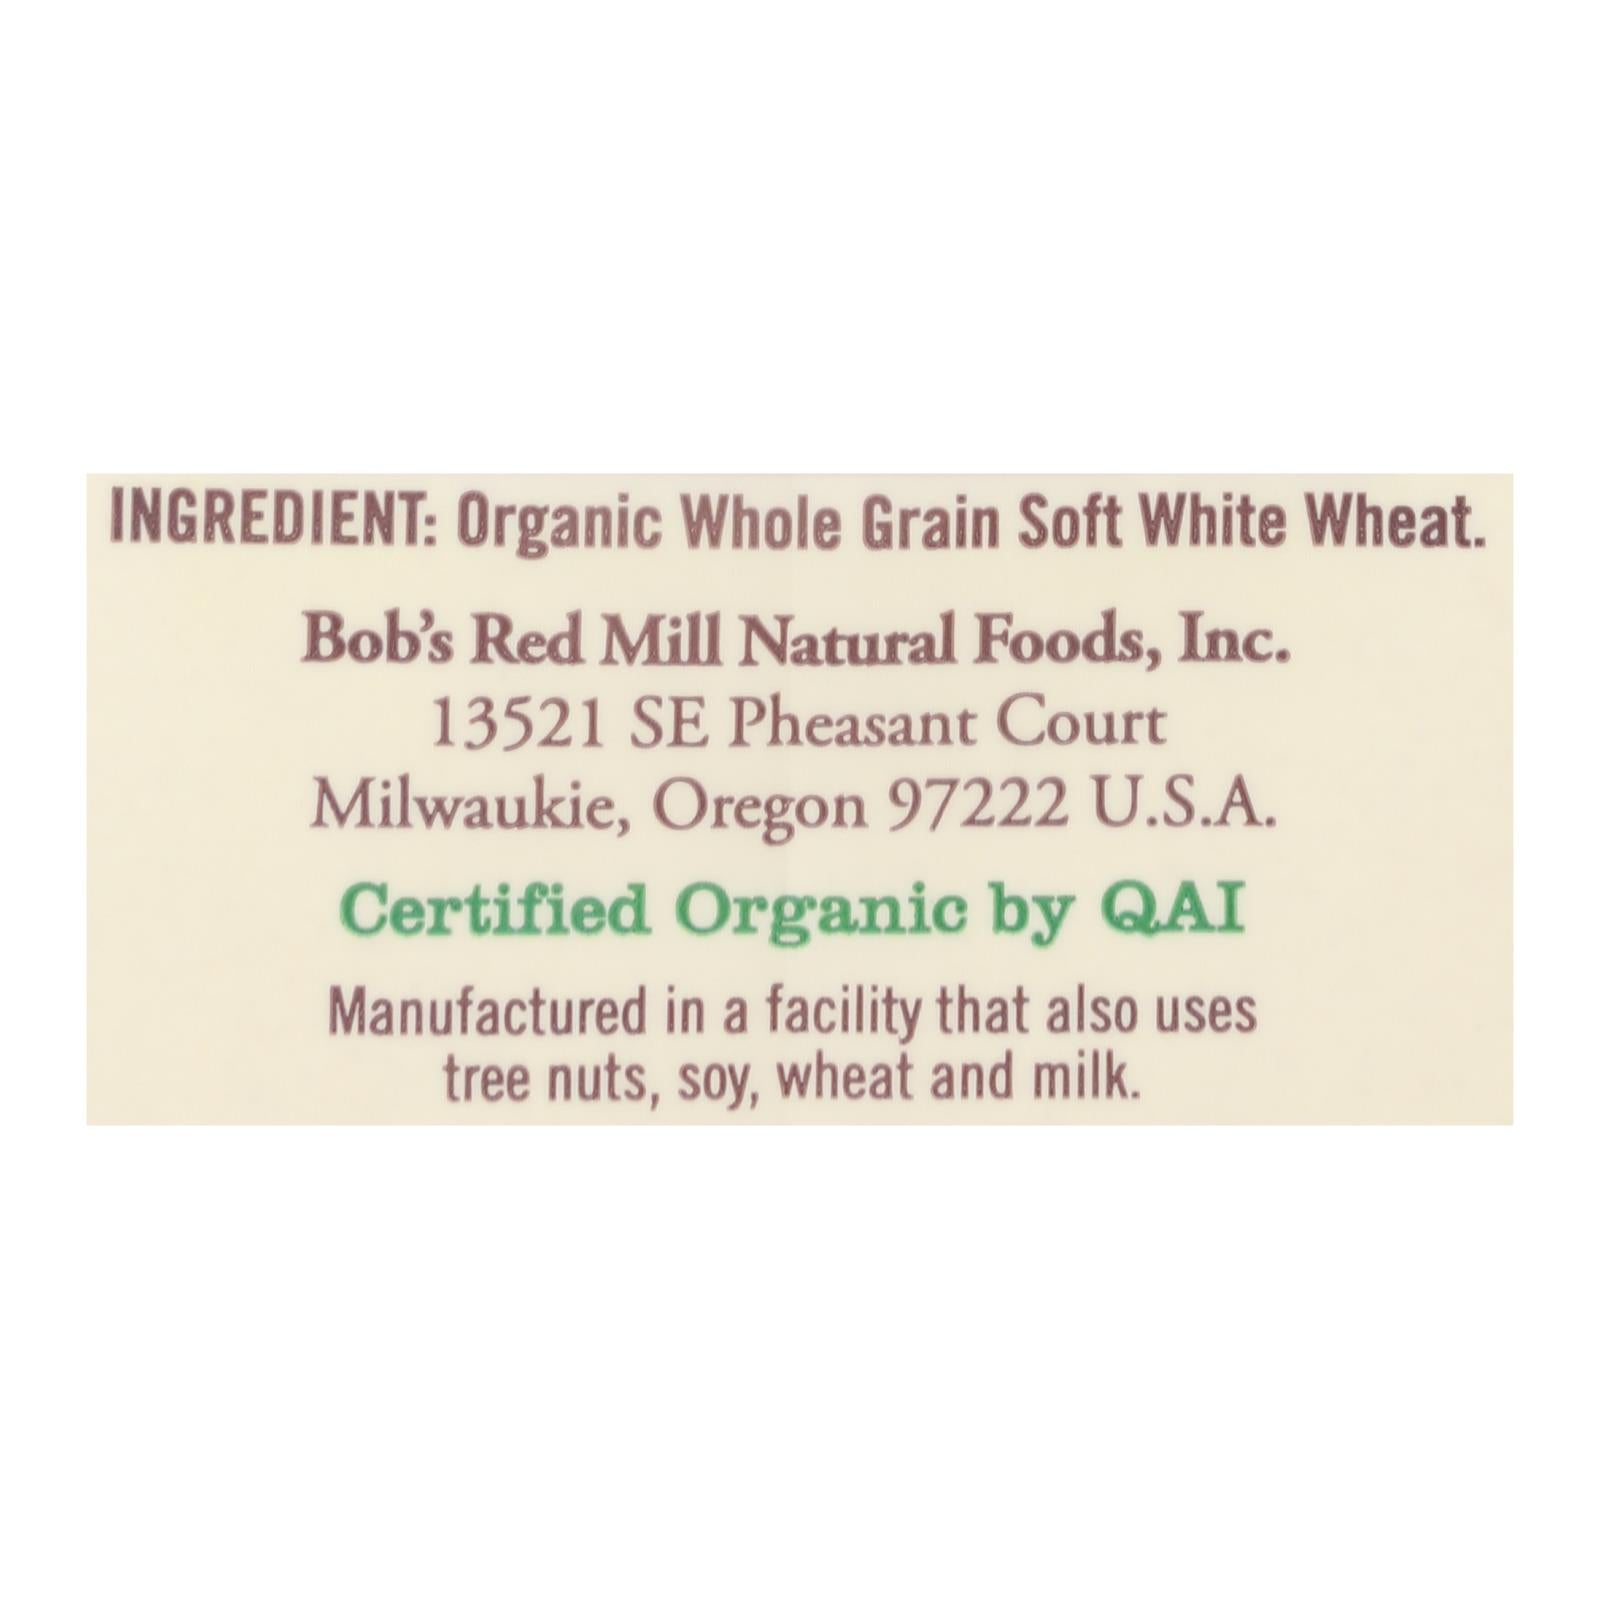 Bob's Red Mill - Organic Whole Wheat Pastry Flour - 5 Lb - Case Of 4